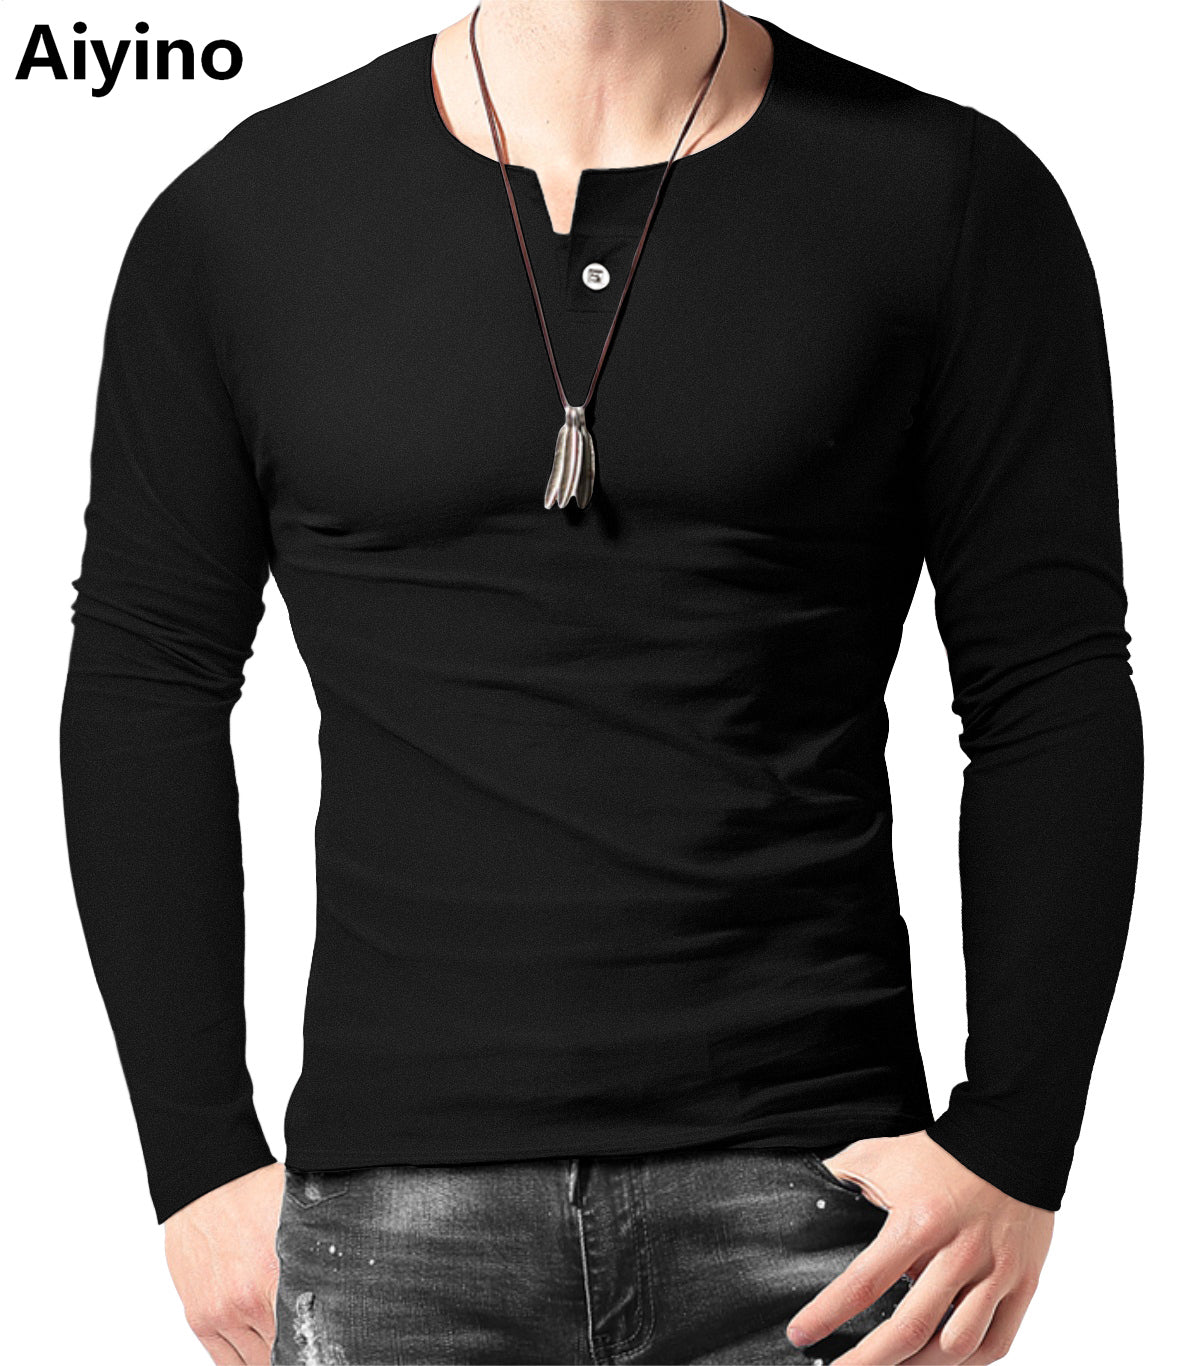 Aiyino Men's Casual Slim Fit Single Button Long Sleeve Placket Plain Henley Top T Shirts